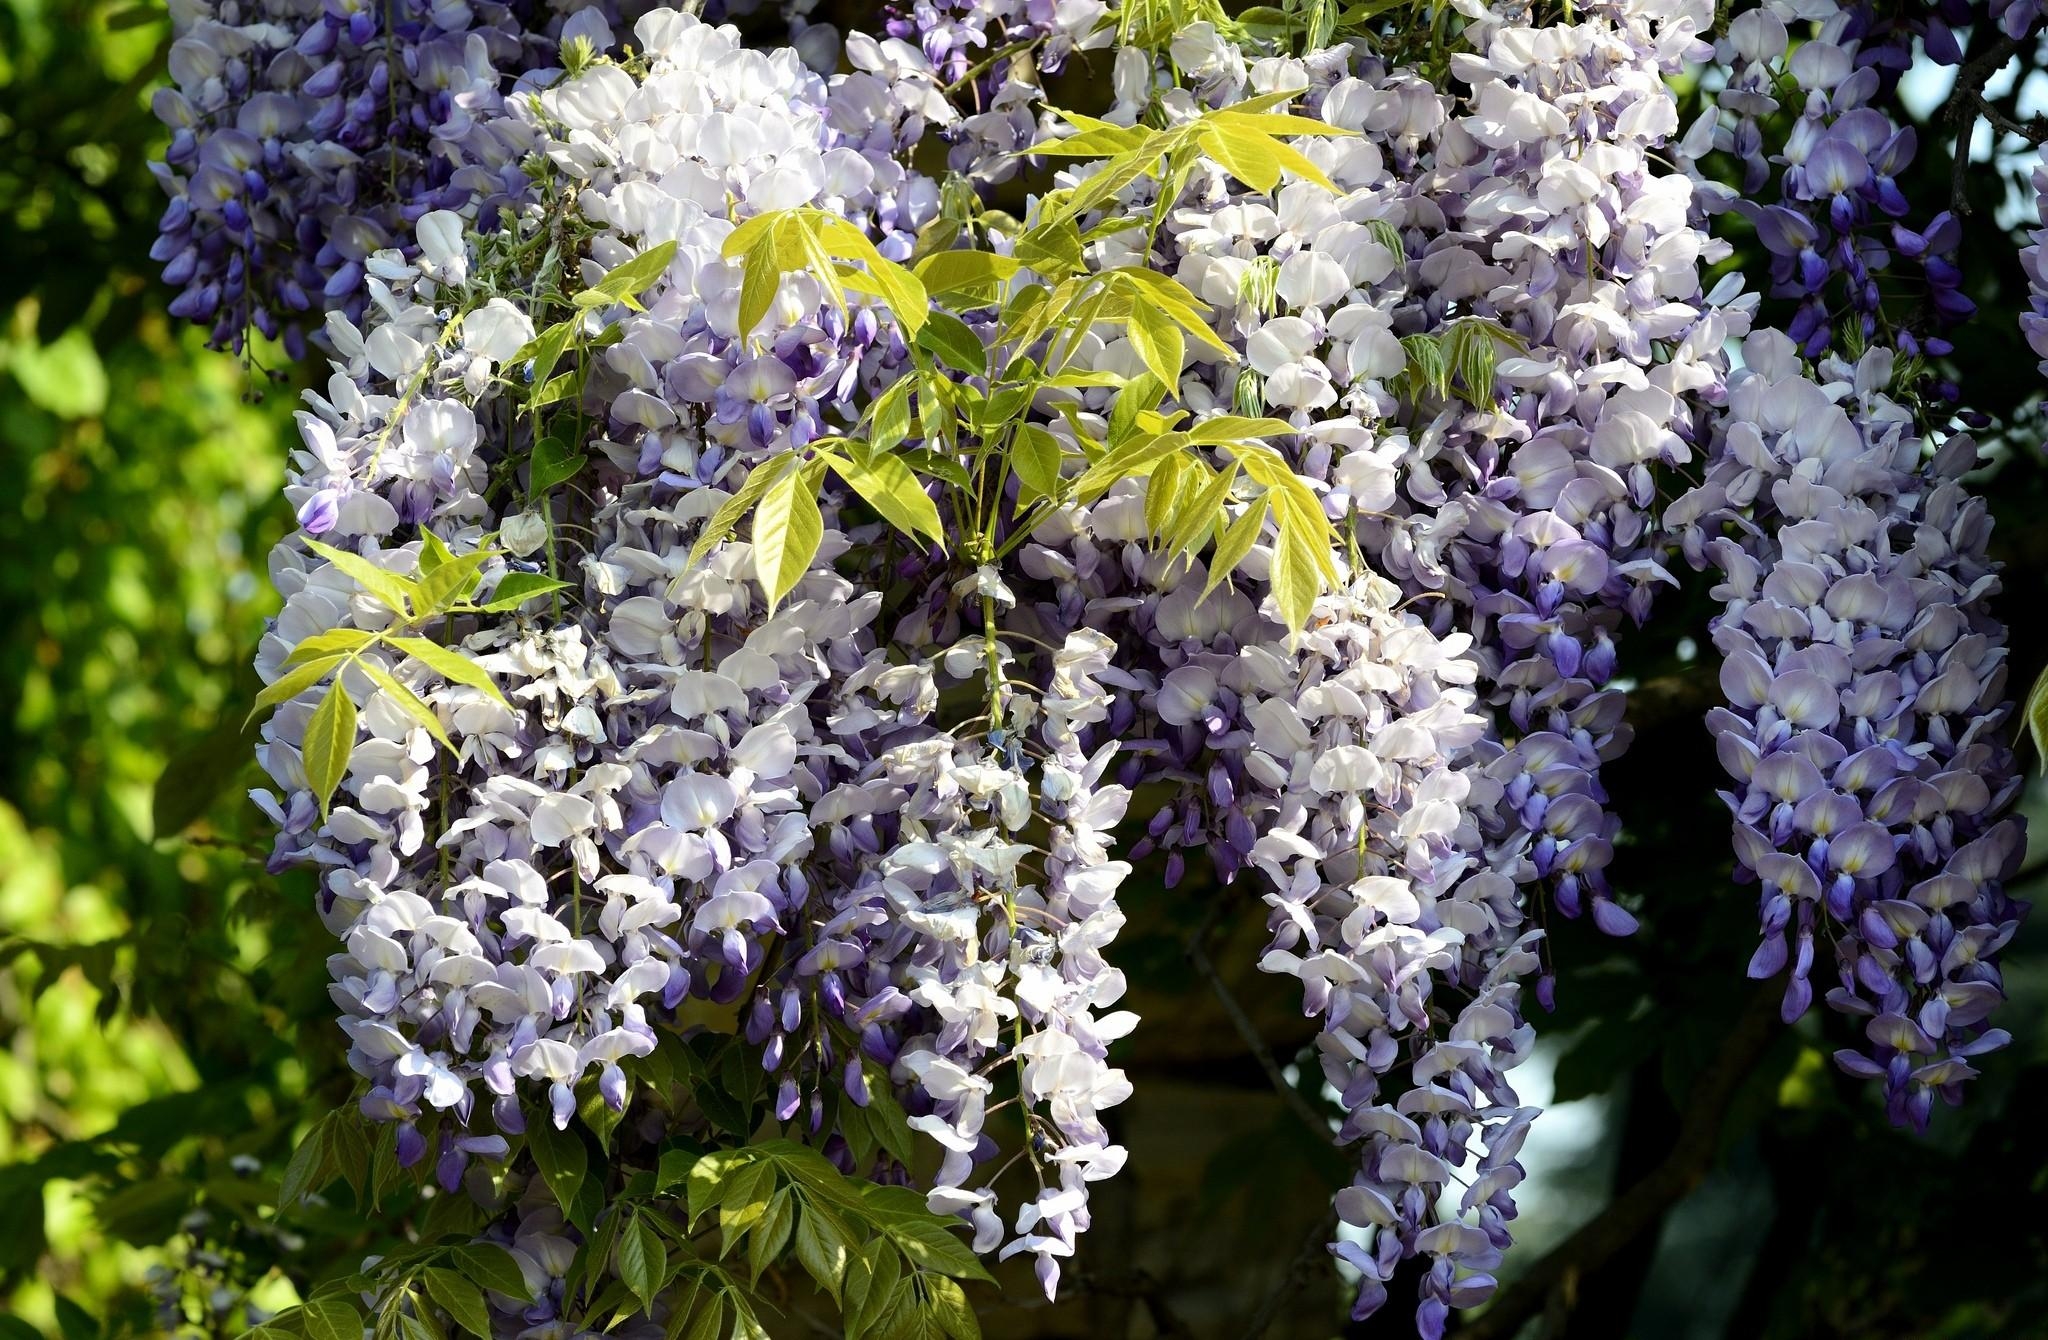 clusters, flowers, leaves, branch, bunches, sunny, wisteria wallpaper for mobile